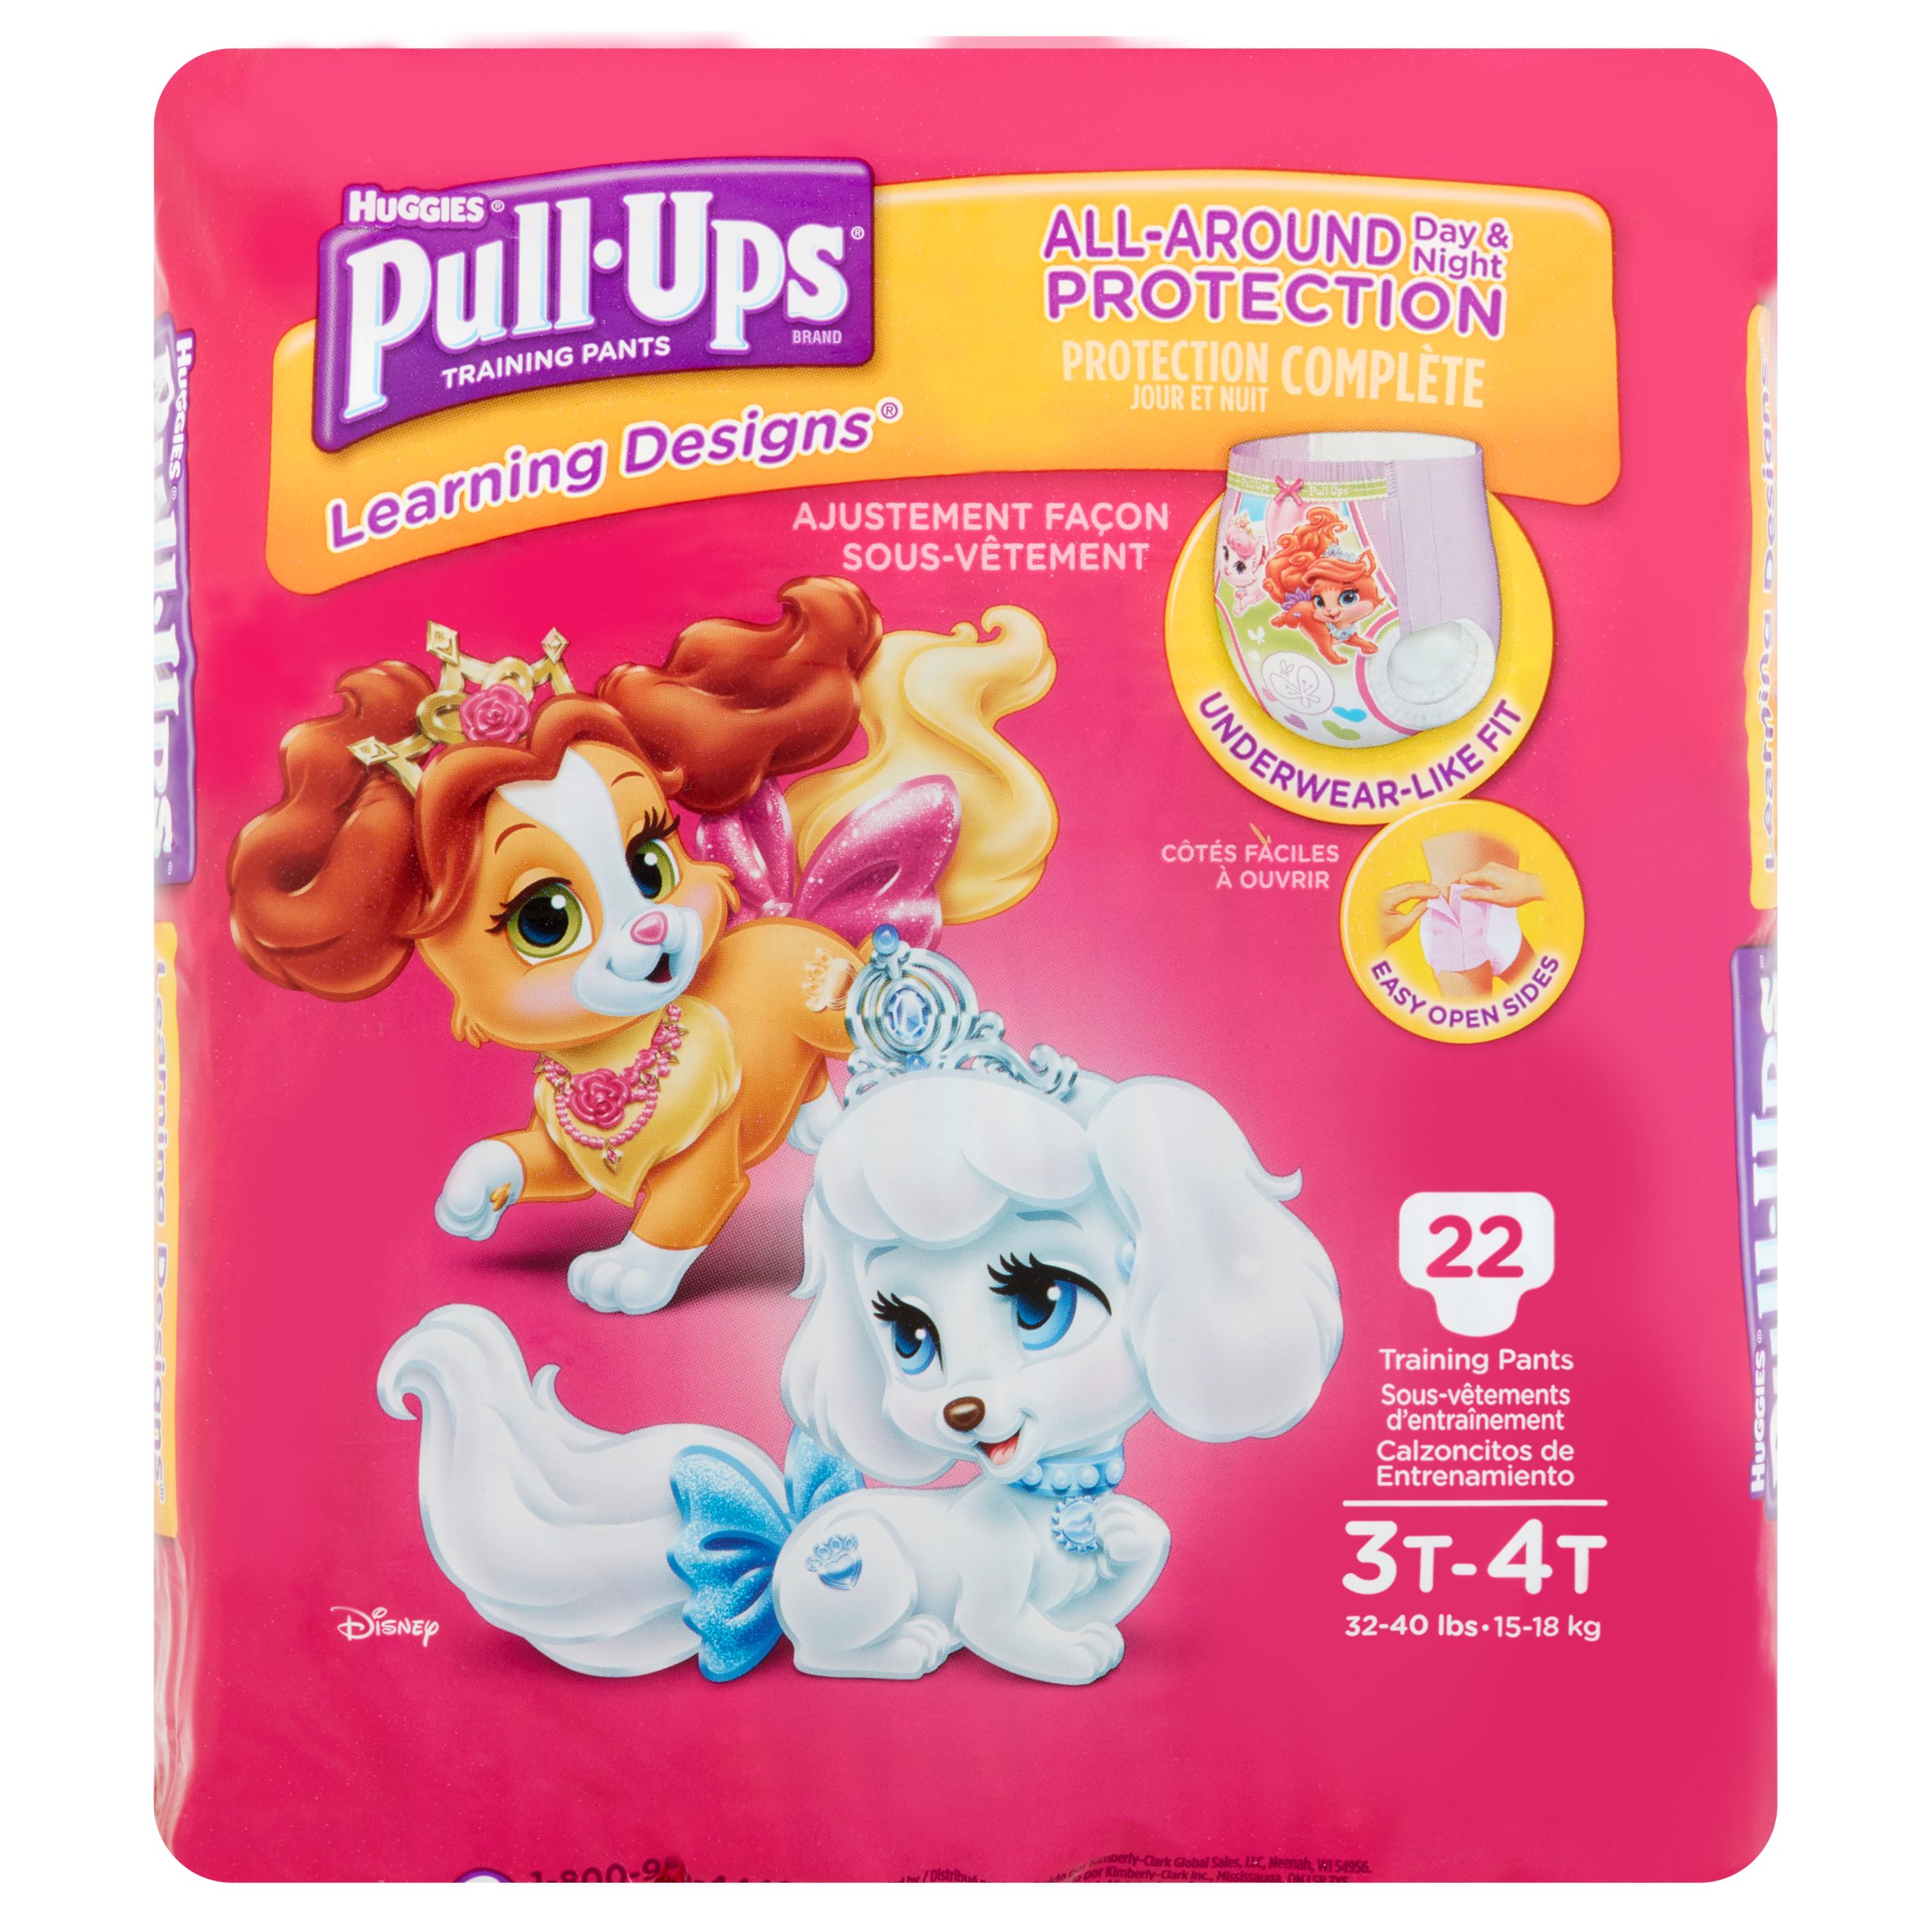 Huggies Pull-Ups All-Around Day & Night Protection Training Pants 3T-4T 32-40 lbs, 22 count - image 1 of 5